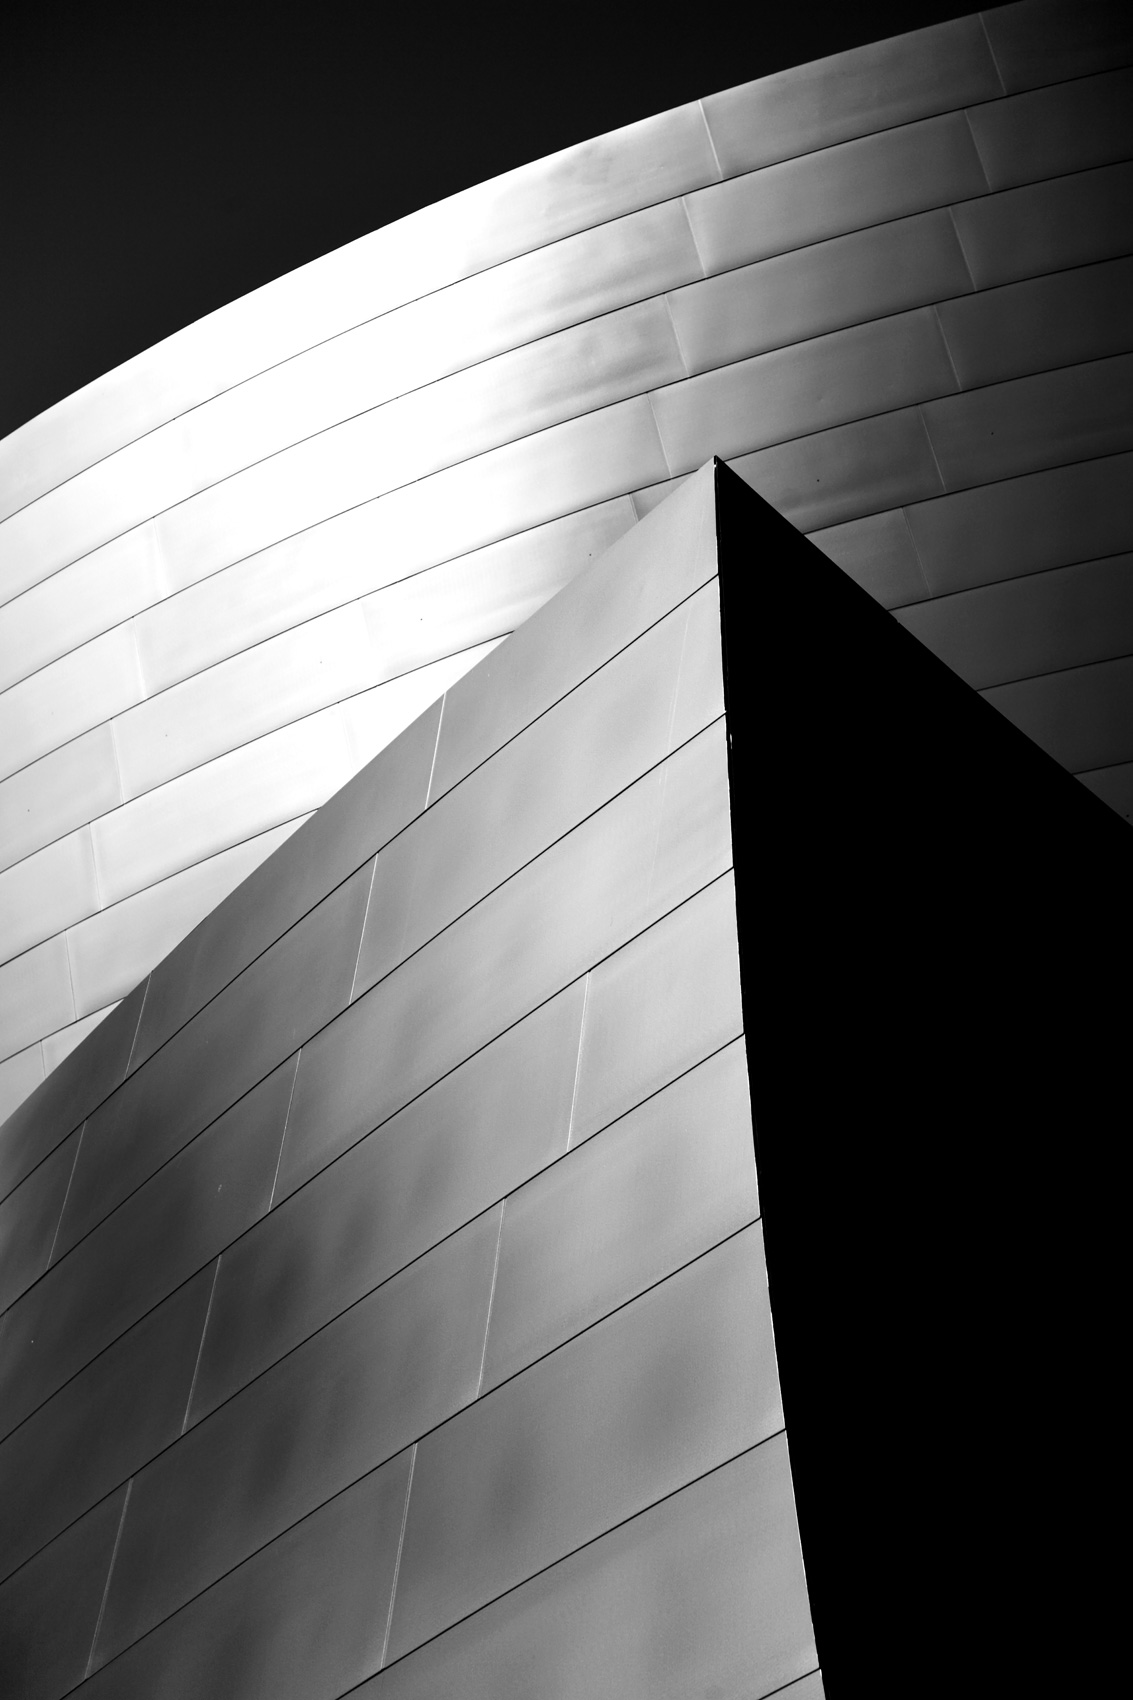 High contract of the walls at the Walt Disney Concert Hall